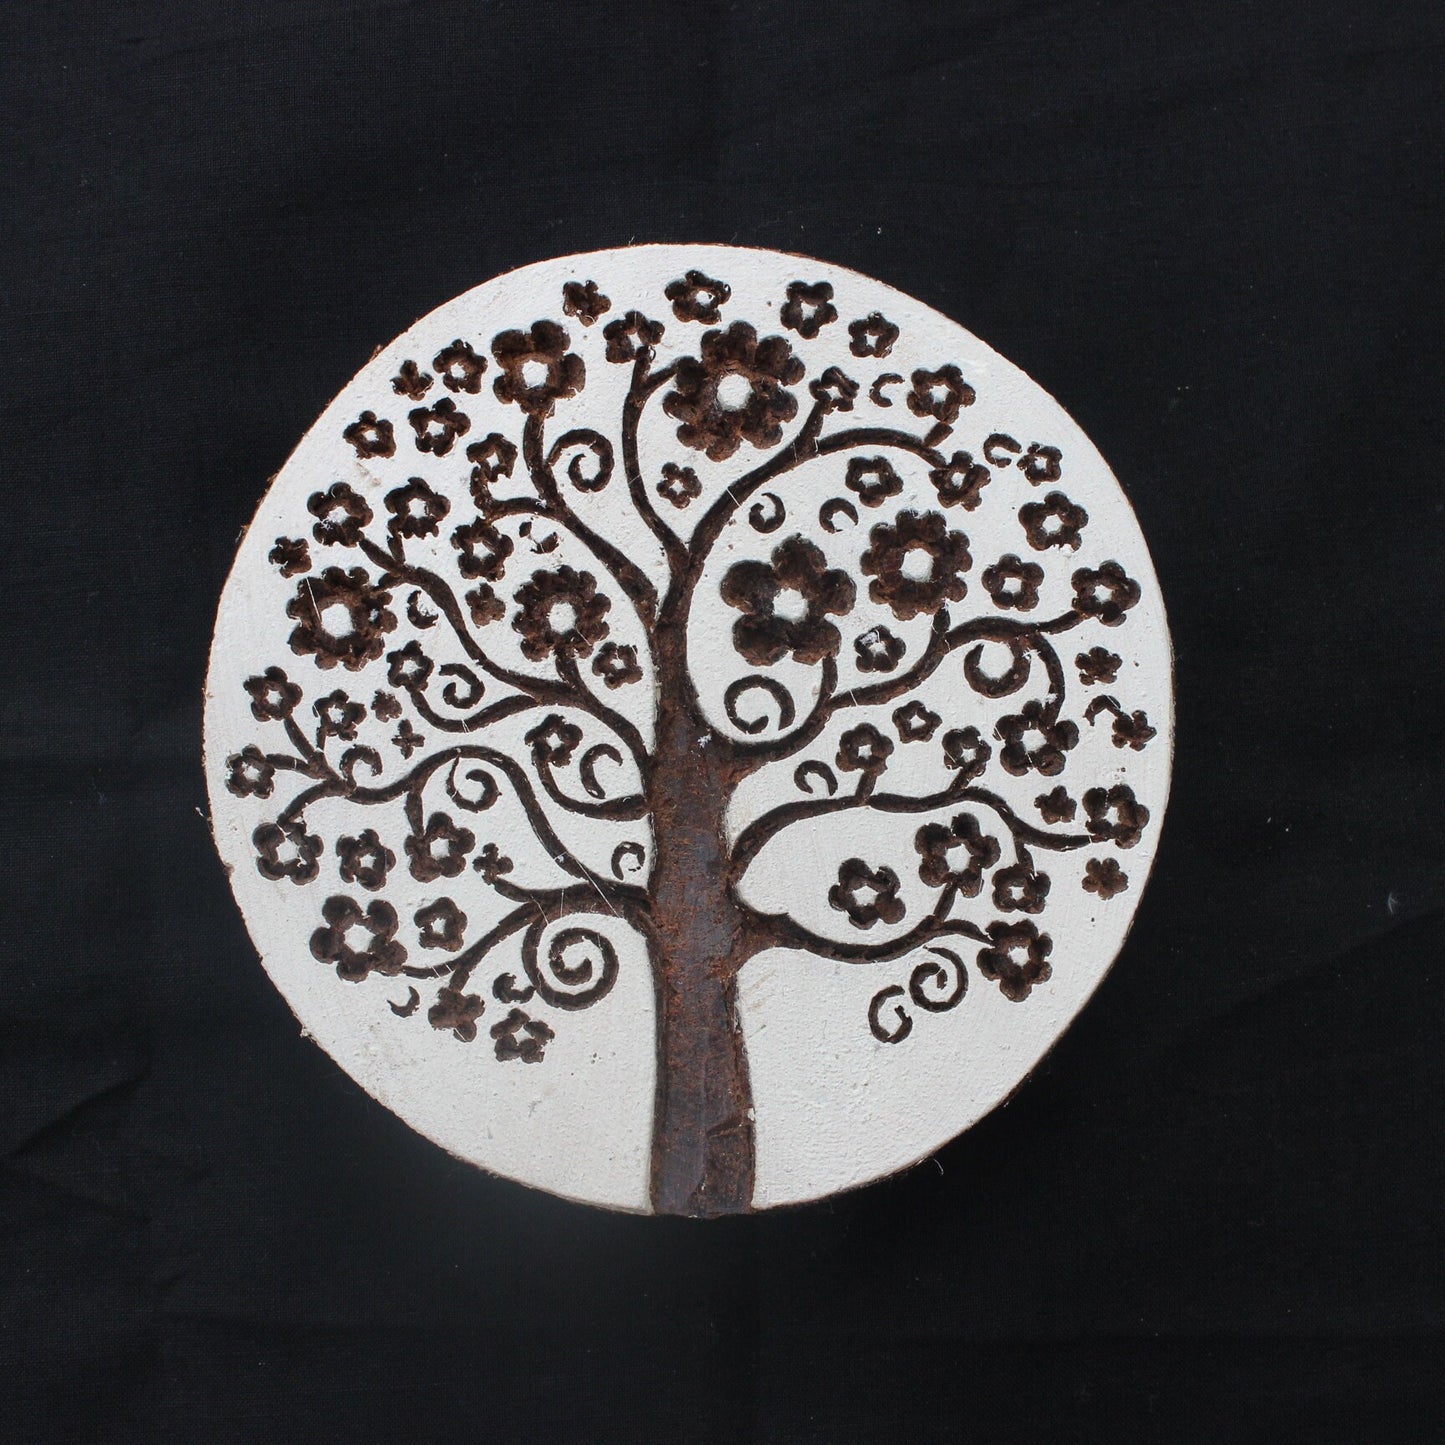 Tree Of Life Wood Block Print Stamp Hand Carved Stamp Tree Block Print Stamp Hand Carved Textile Block For Printing Floral Tree Soap Stamp